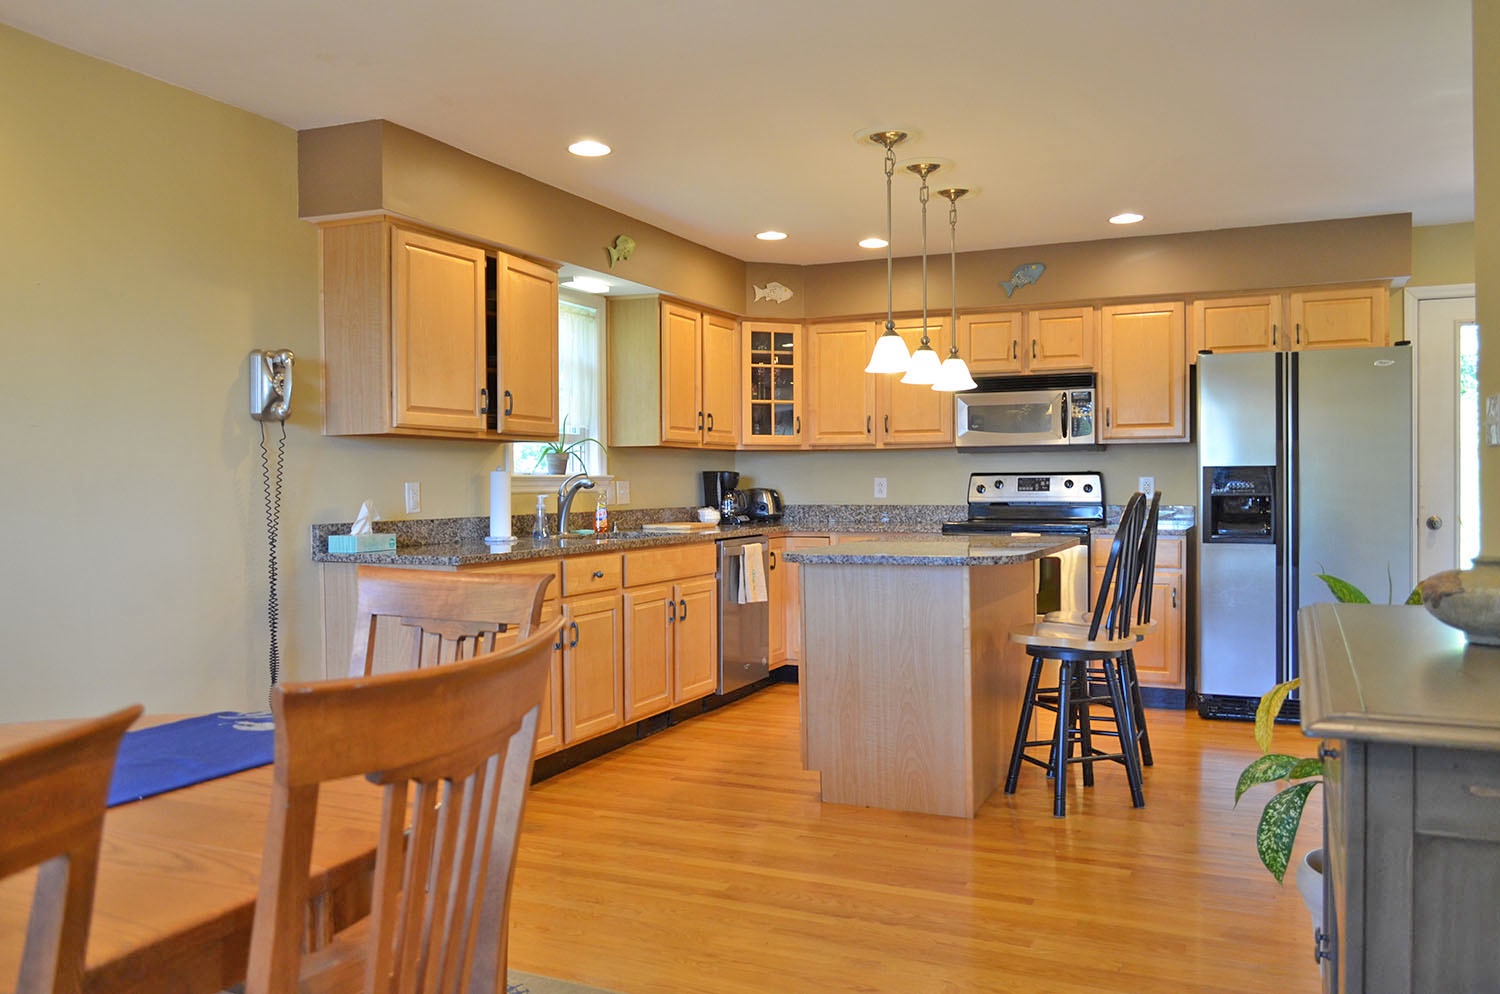 The fully-applianced eat-in kitchen with center island.